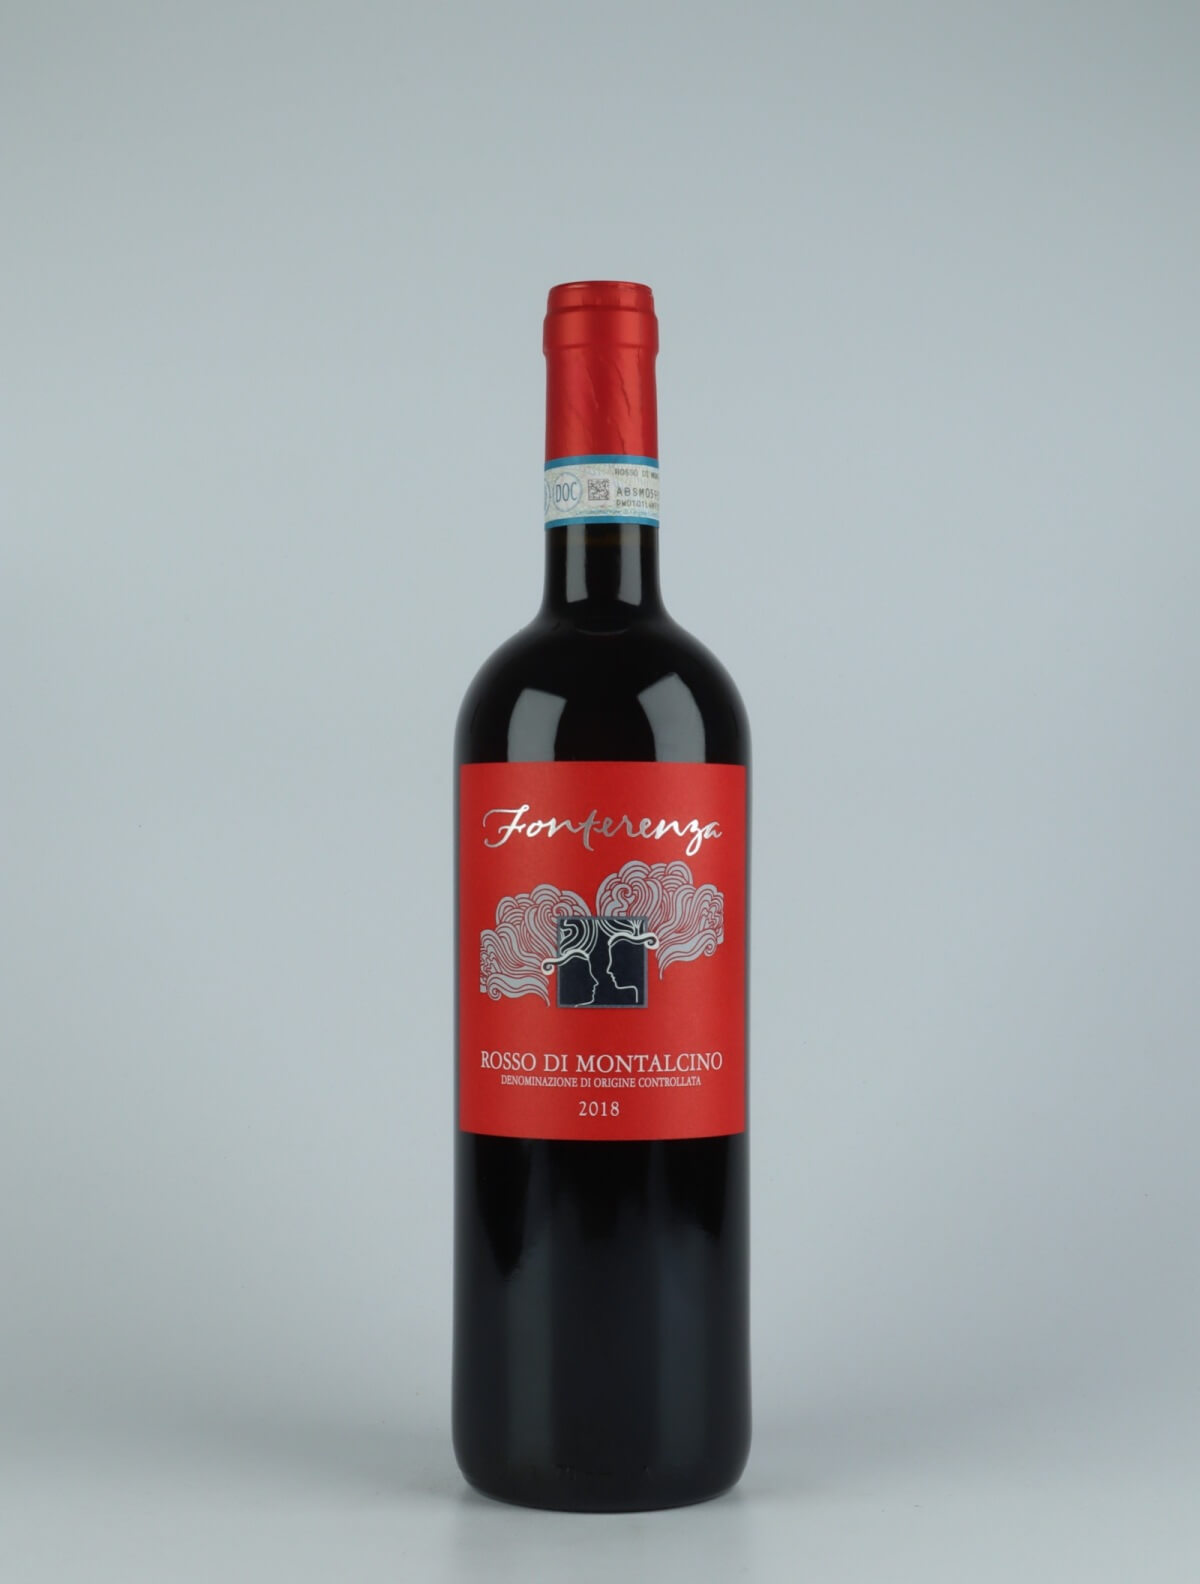 A bottle 2018 Rosso di Montalcino Red wine from Fonterenza, Tuscany in Italy